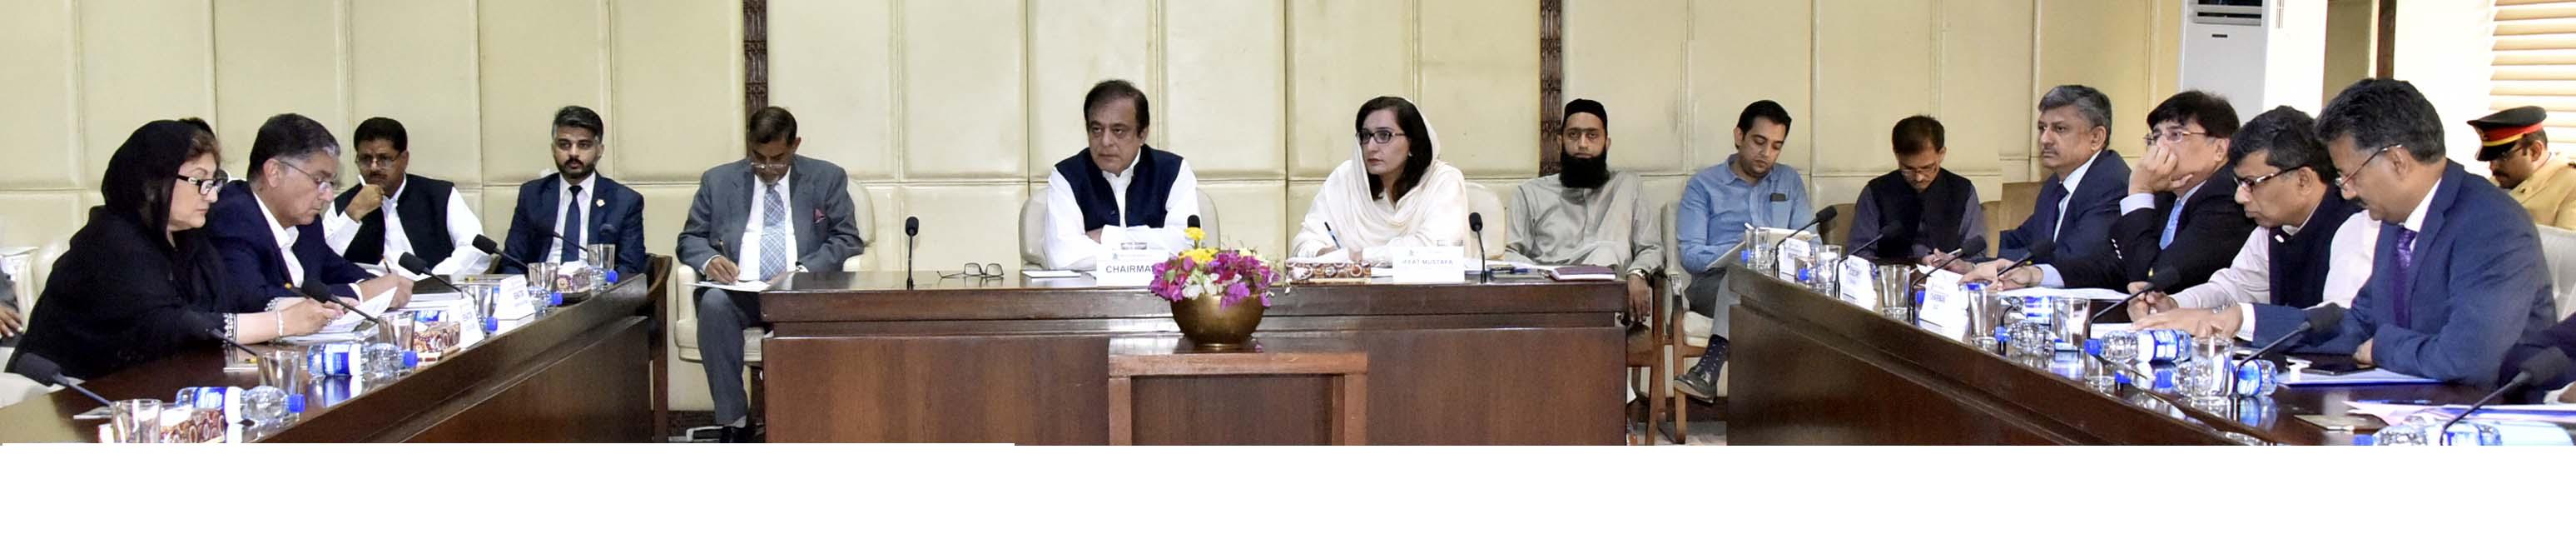 SENATOR SYED SHIBLI FARAZ, CHAIRMAN SENATE STANDING COMMITTEE ON COMMERCE AND TEXTILE INDUSTRY PRESIDING OVER A MEETING OF THE COMMITTEE AT PARLIAMENT HOUSE ISLAMABAD ON SEPTEMBER 27, 2018.